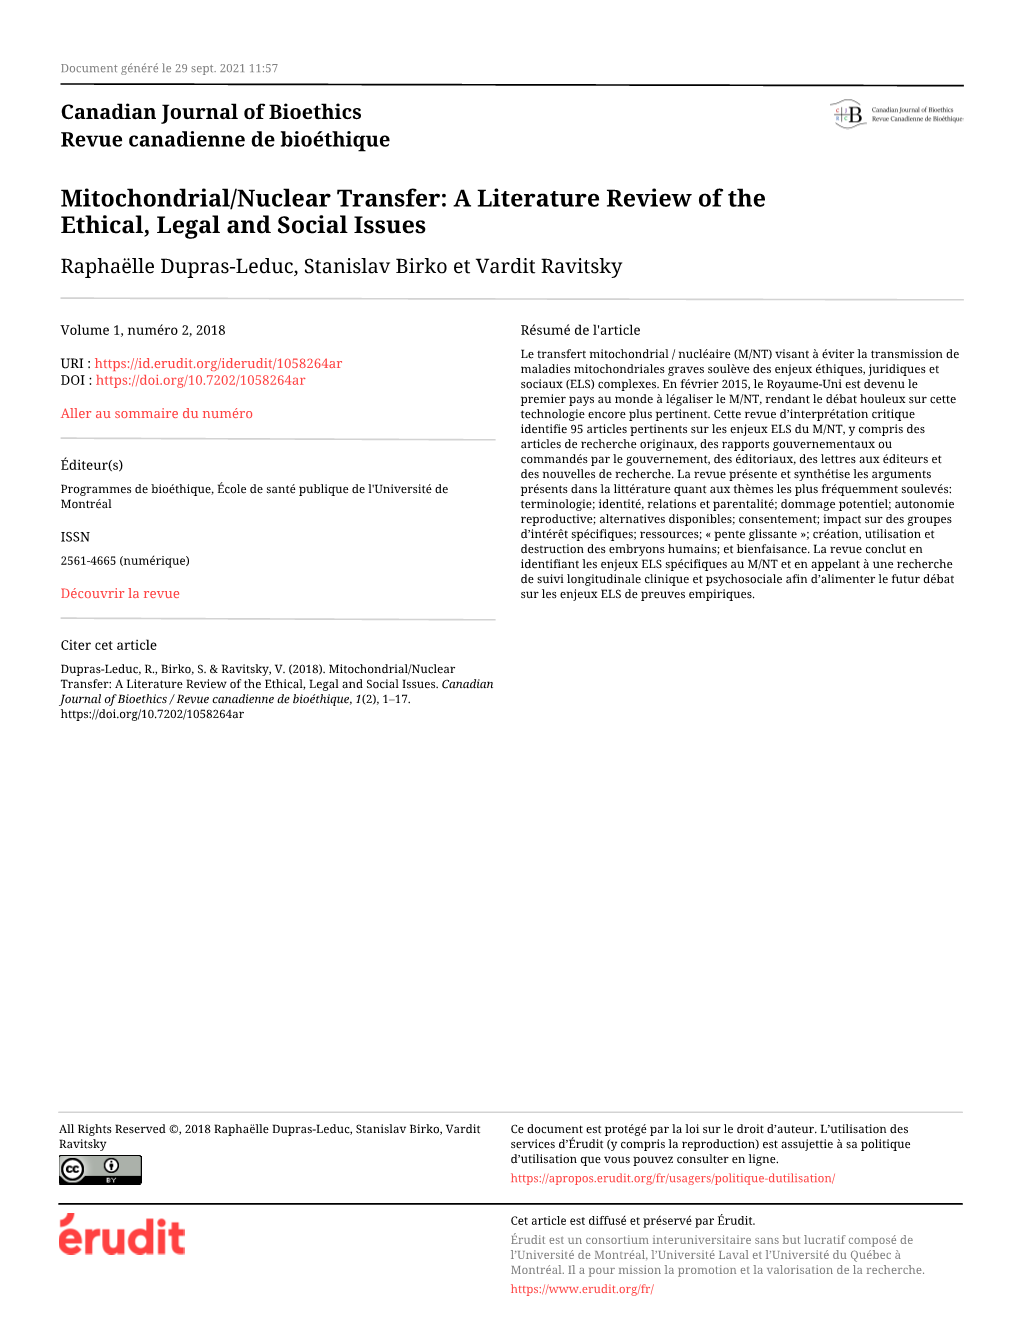 Mitochondrial/Nuclear Transfer: a Literature Review of the Ethical, Legal and Social Issues Raphaëlle Dupras-Leduc, Stanislav Birko Et Vardit Ravitsky